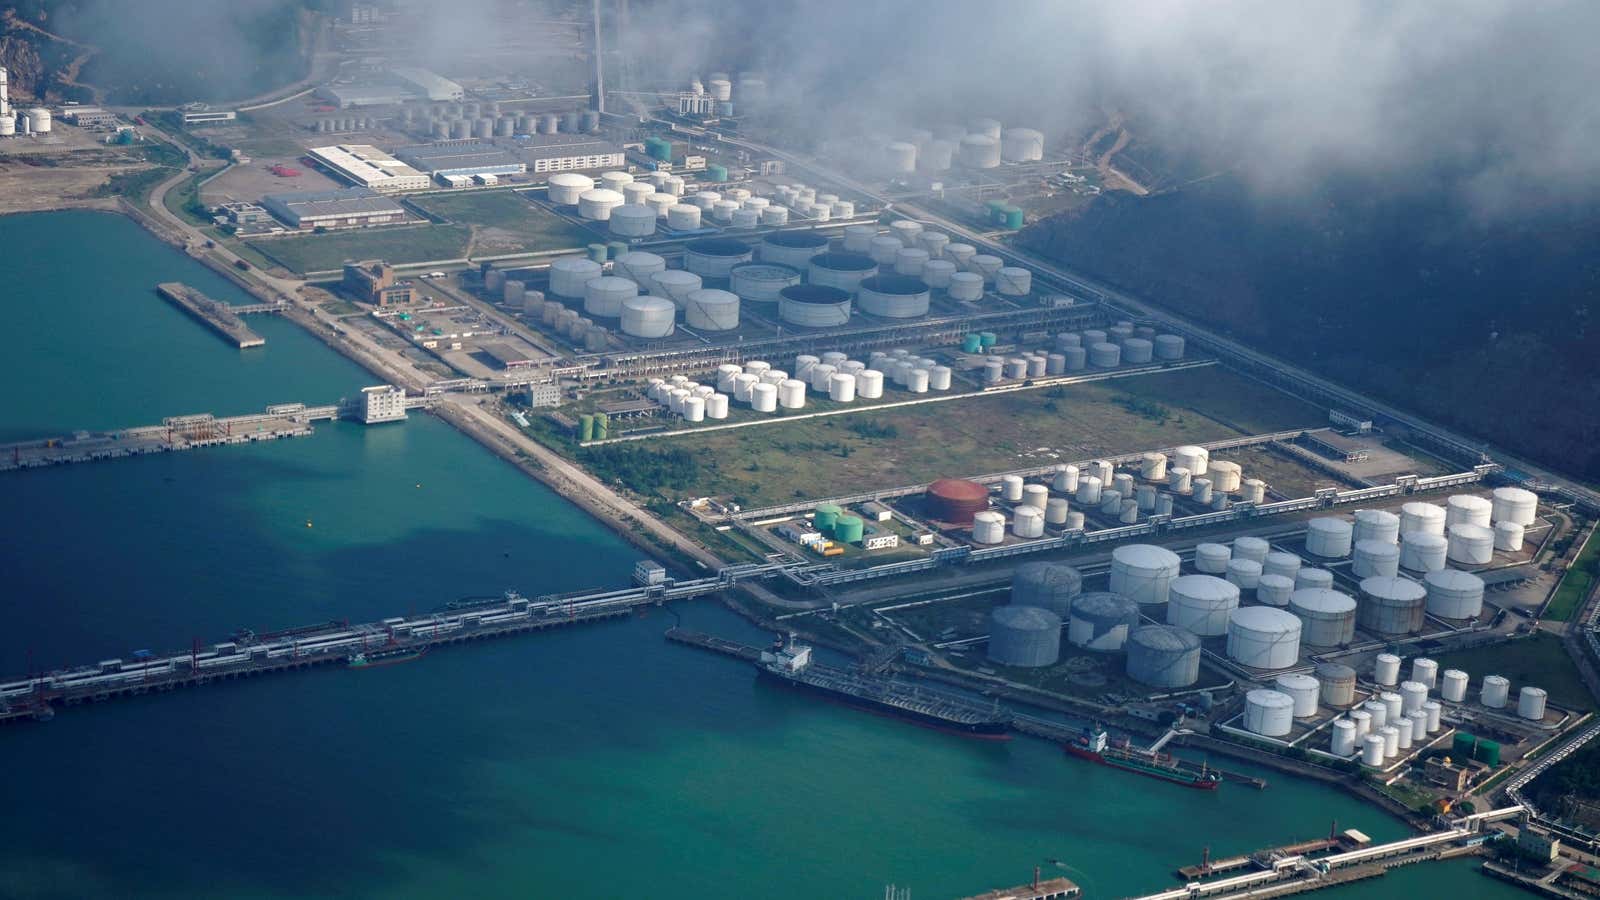 Oil and gas tanks are seen at an oil warehouse at a port in Zhuhai, China.